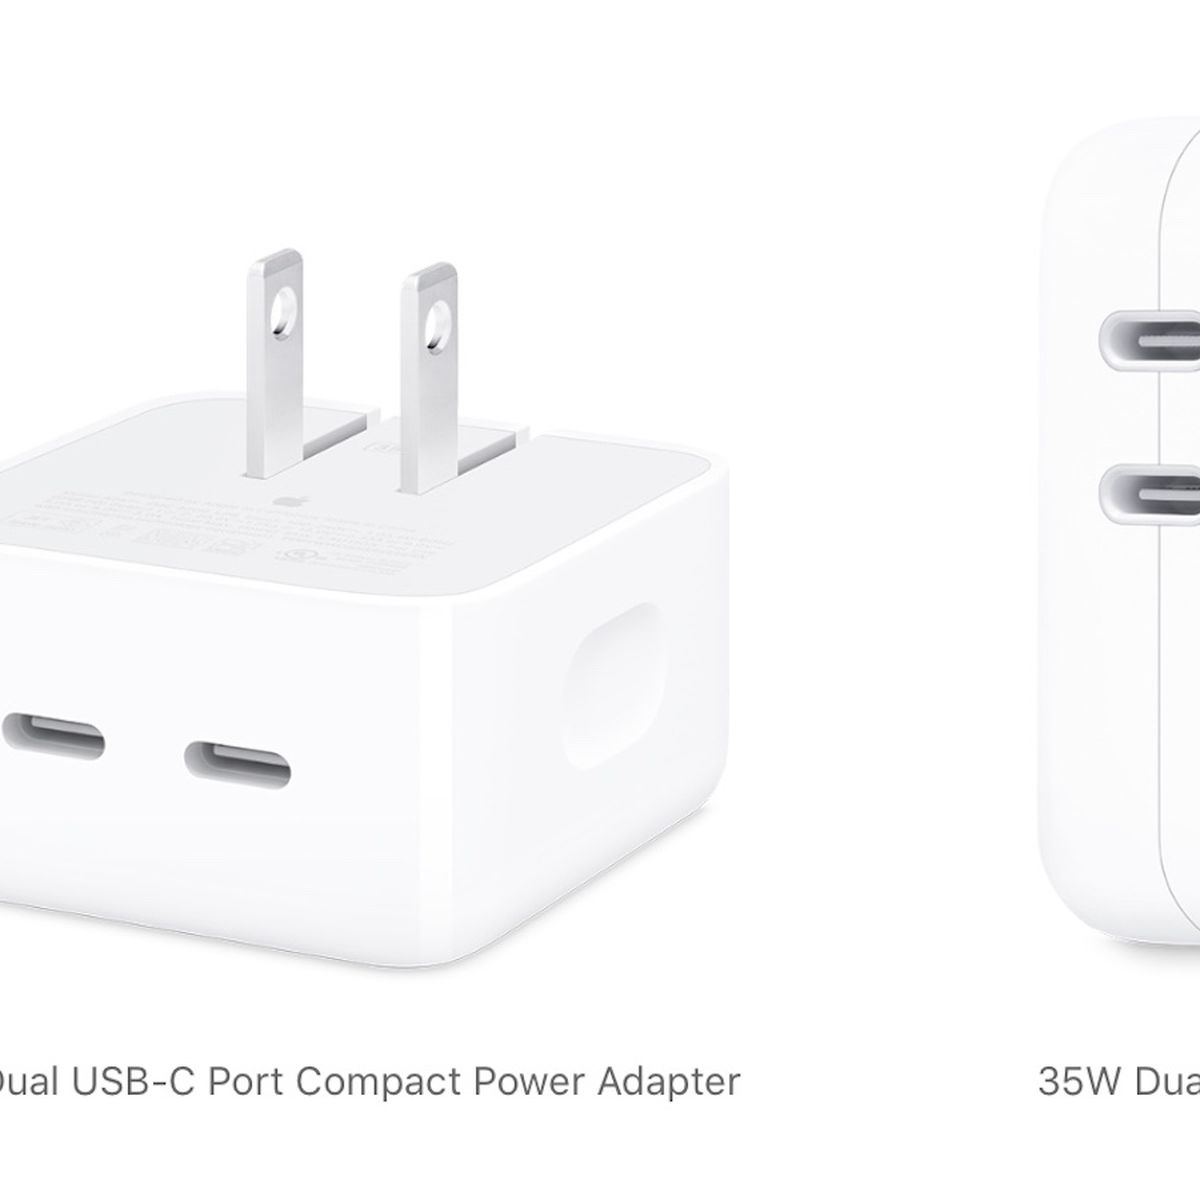 Apple Shares Charging Details for New Dual USB-C Power Adapters - MacRumors